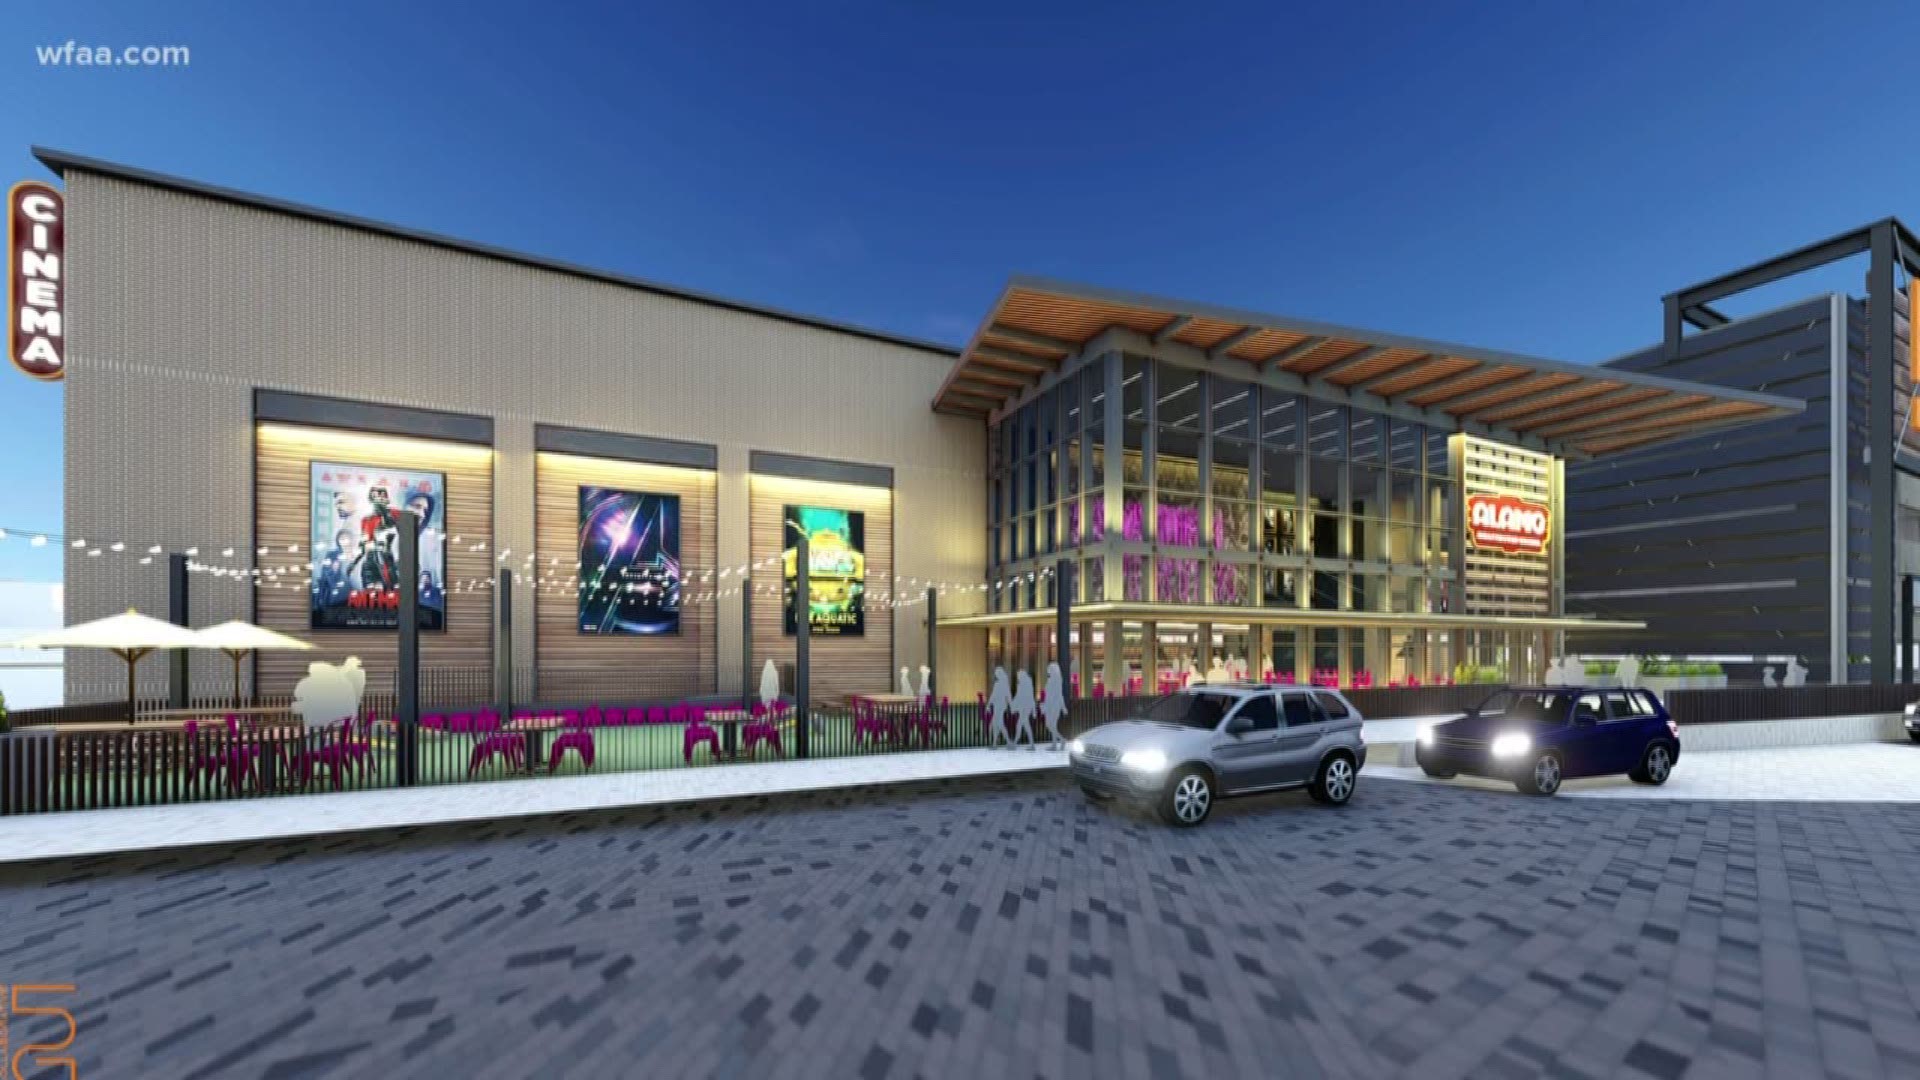 The new theater is expected to open in 2020.